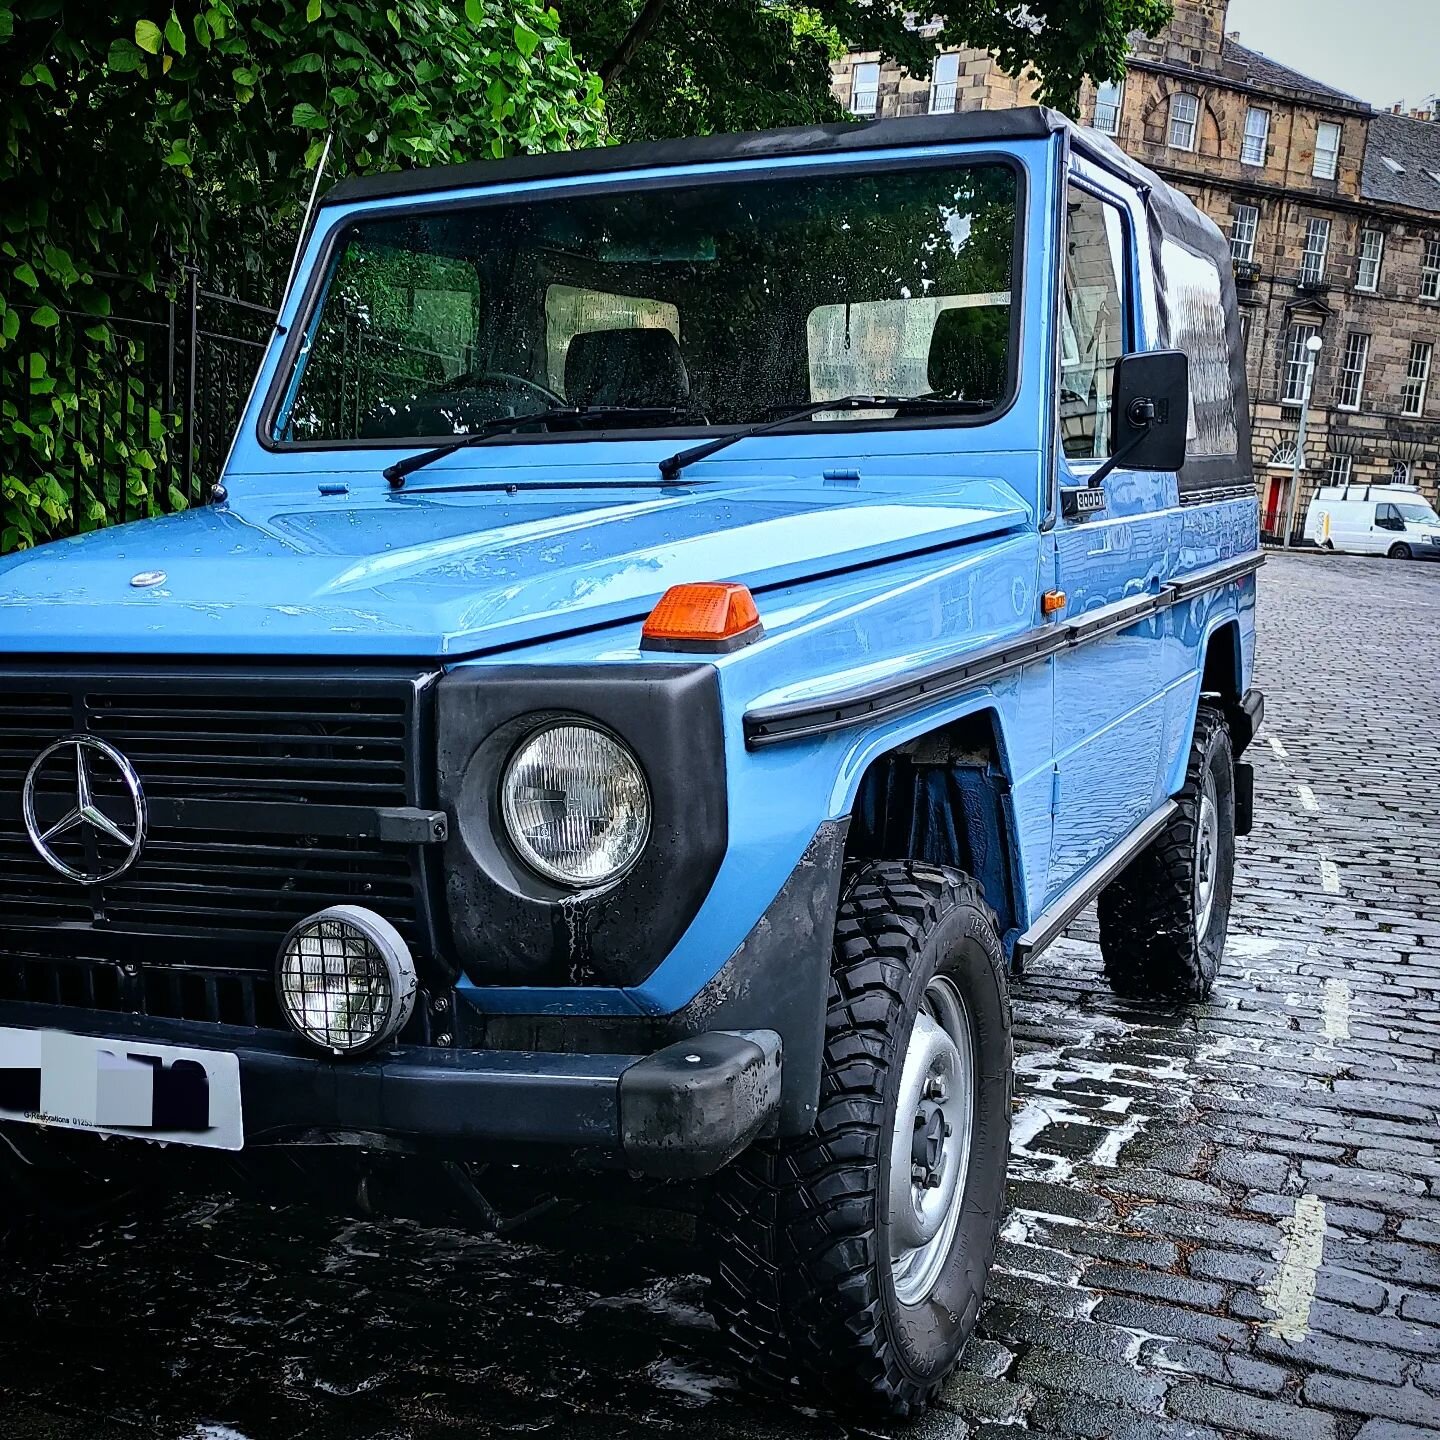 Not many G wagons in Edinburgh but even rarer is this classic  cabrio version. This exceptional example is coming up to 35 years old. 
.
.
.
.

#gclass #300ge #gclassmercedes  #mercedesclasseg #mercedes4x4 #edinburghlife #edinburghvaleting #230ge #gk